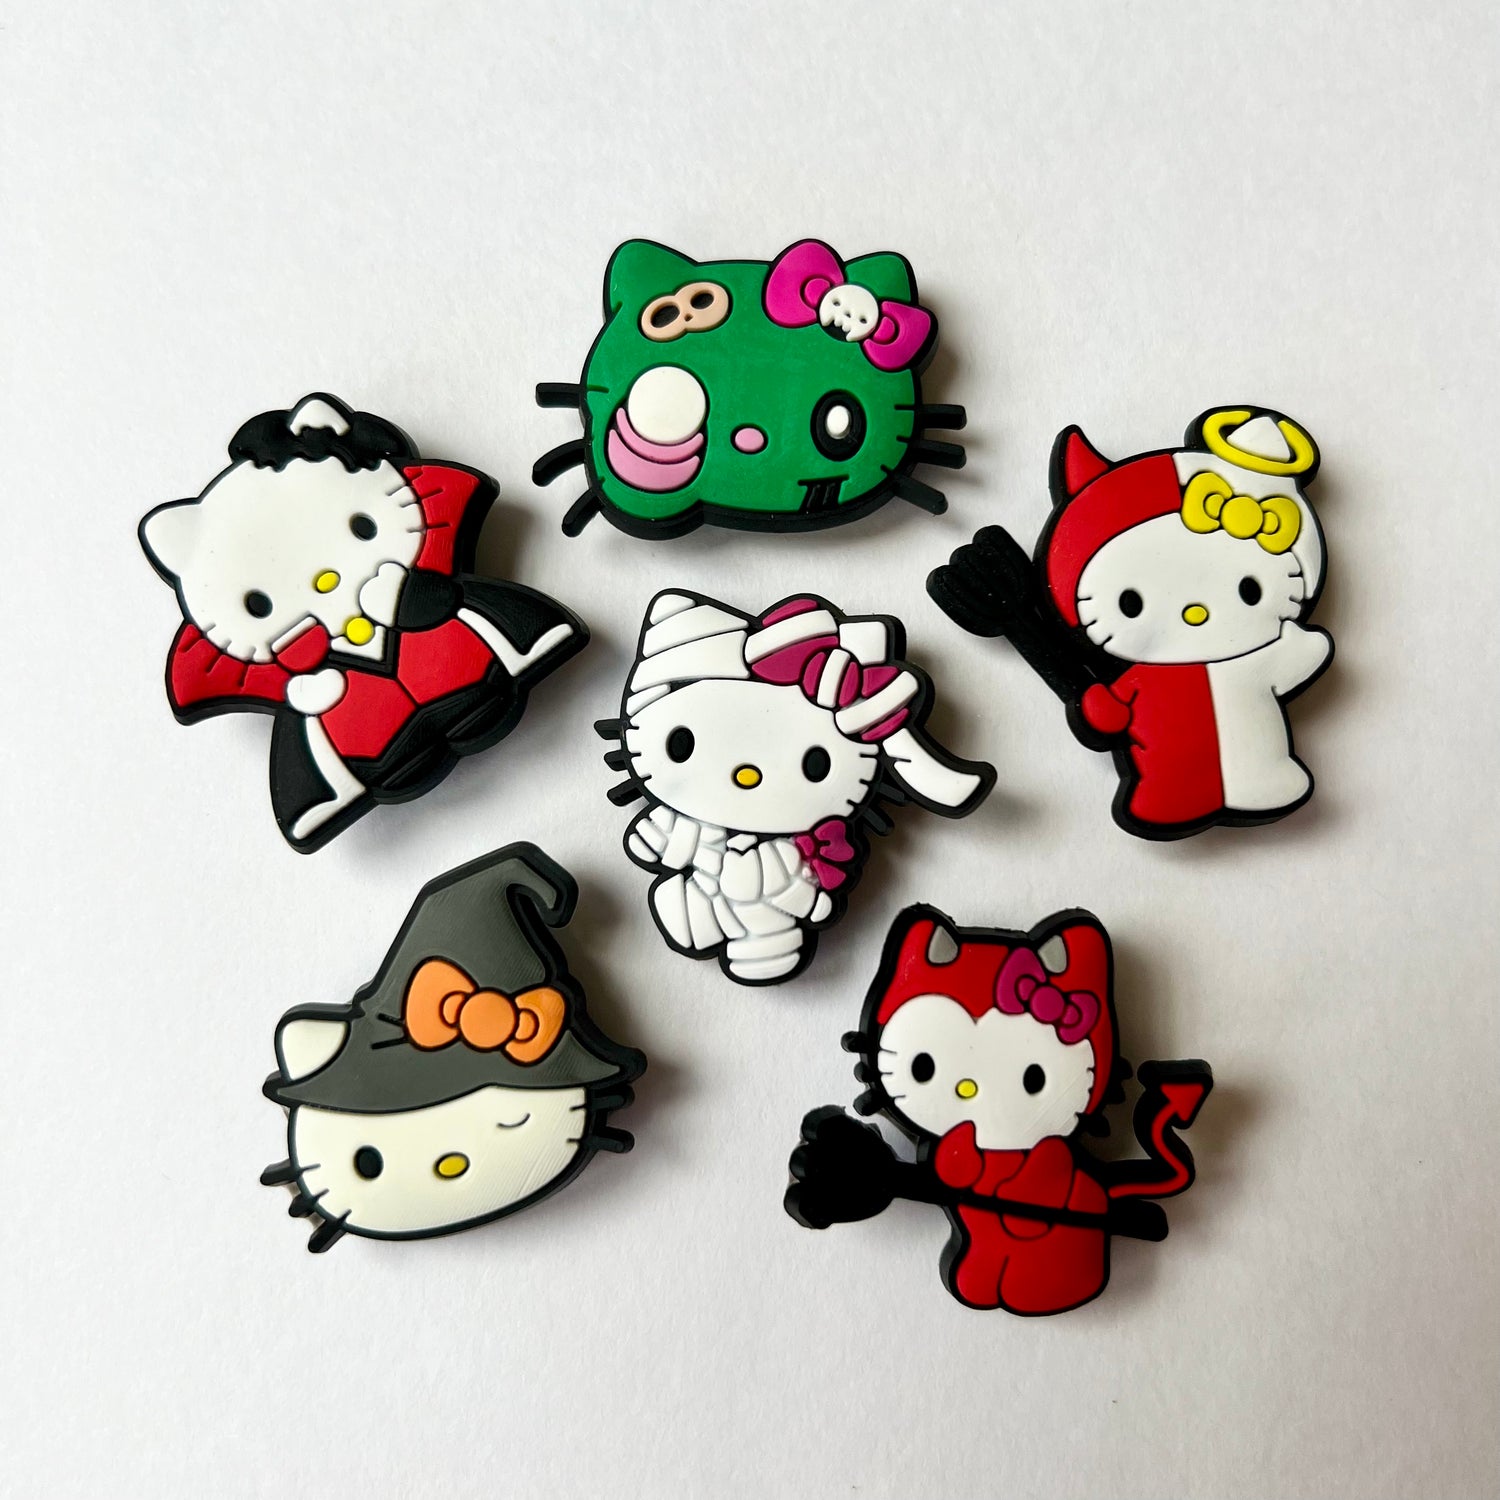 The Halloween Kitty Pack